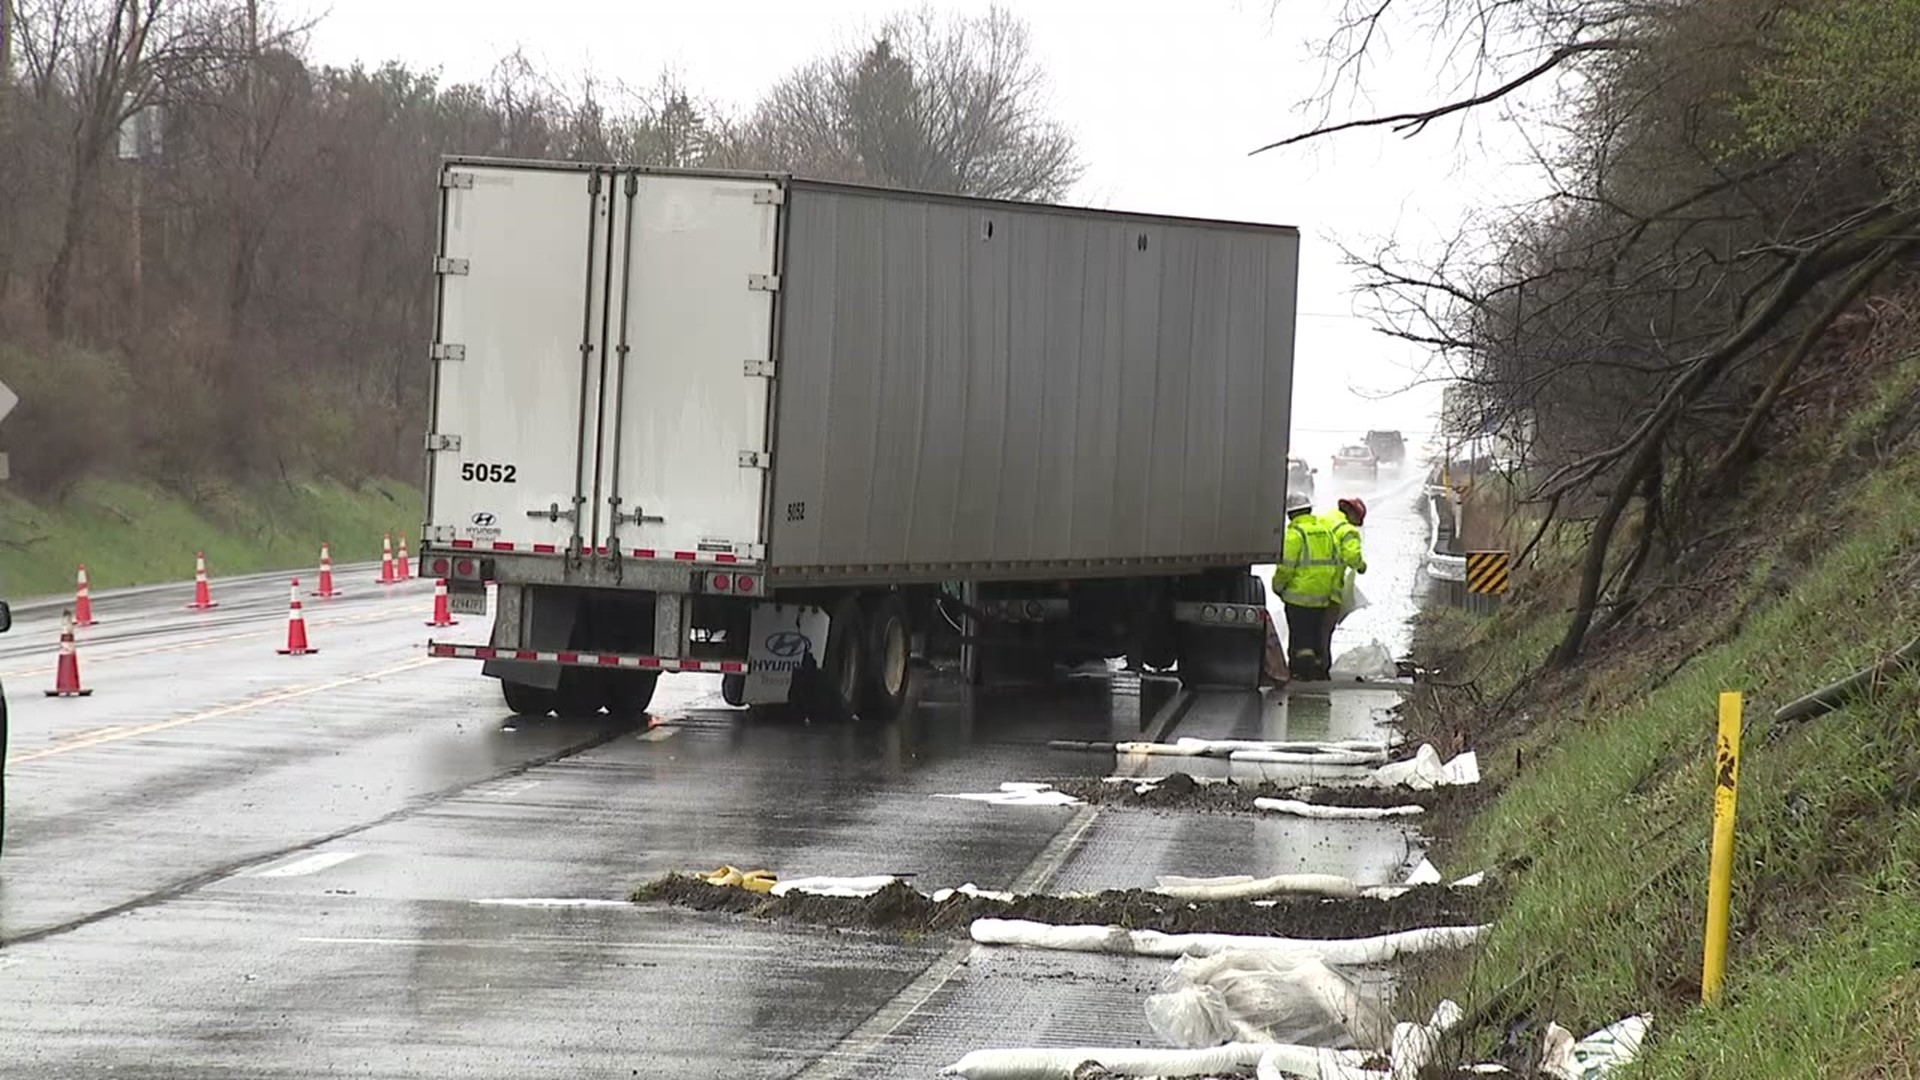 A man pulled out onto Route 15 when his car was hit by a tractor-trailer.